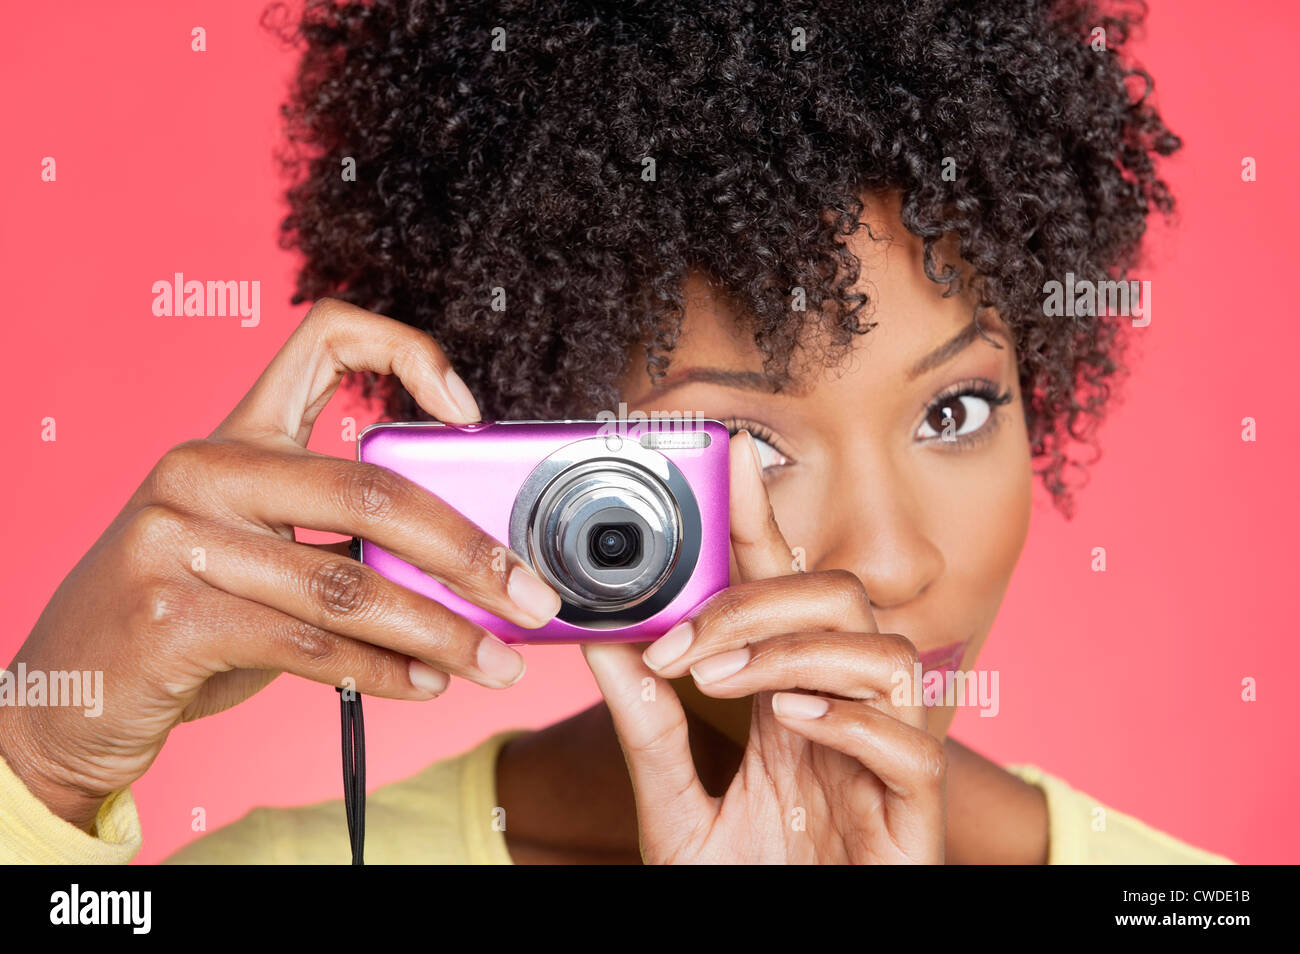 Portrait of an African American woman taking picture from camera over colored background Stock Photo